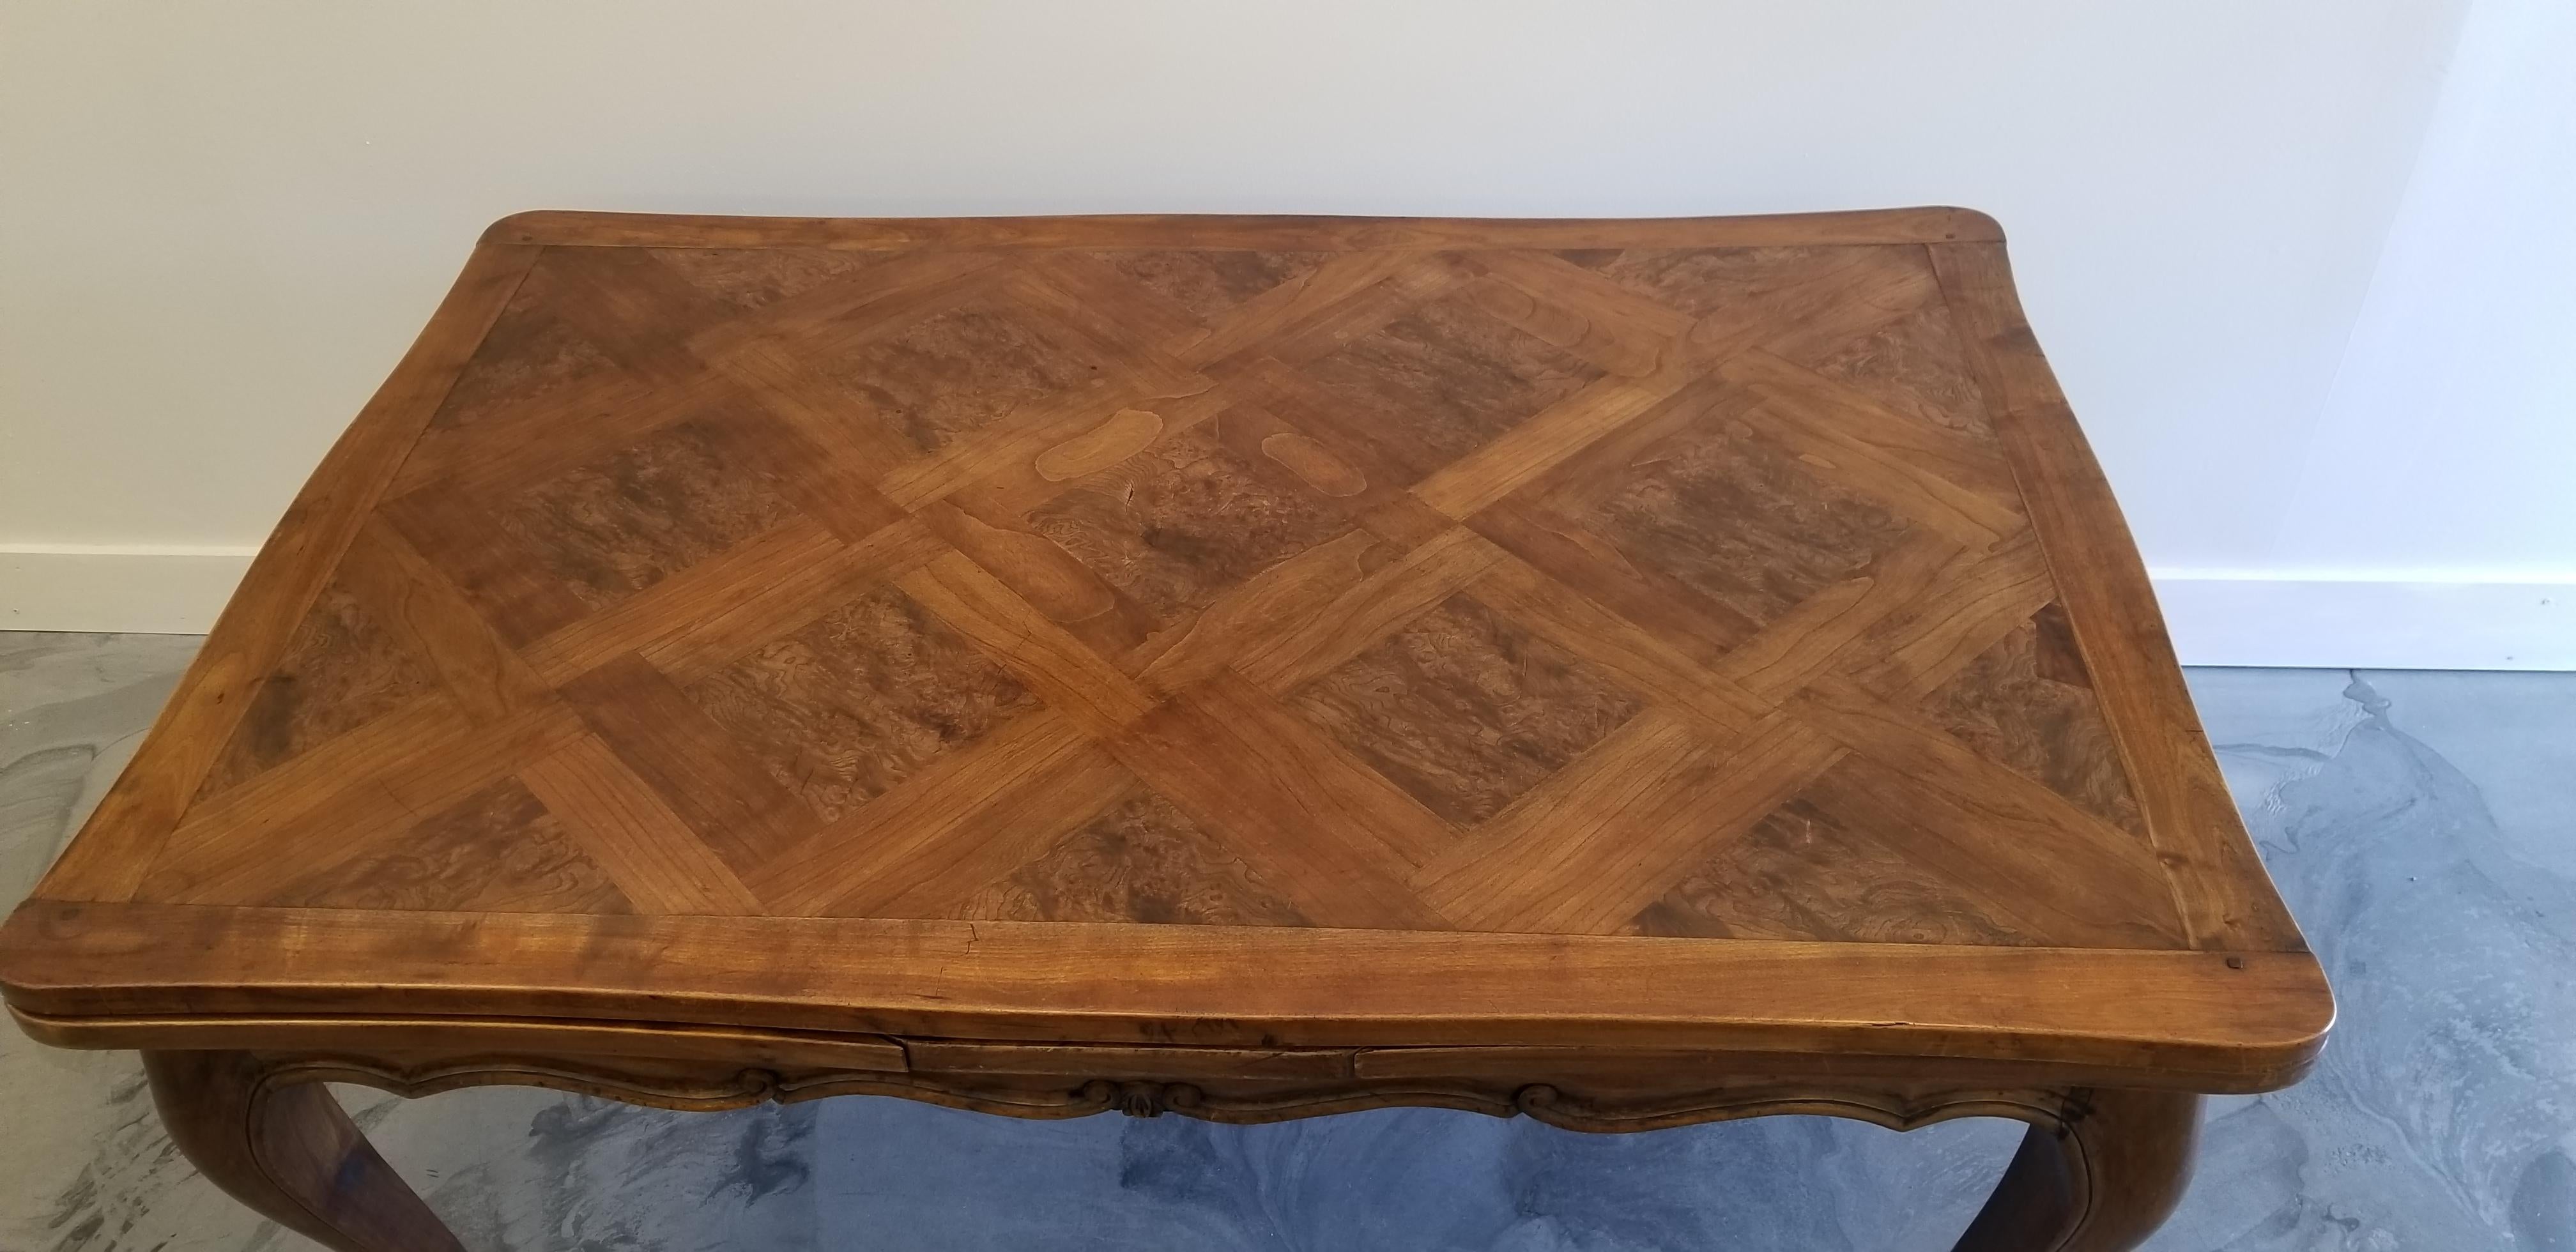 Early 20th Century French Provincial Draw-Leaf Dining Table In Good Condition For Sale In Fulton, CA